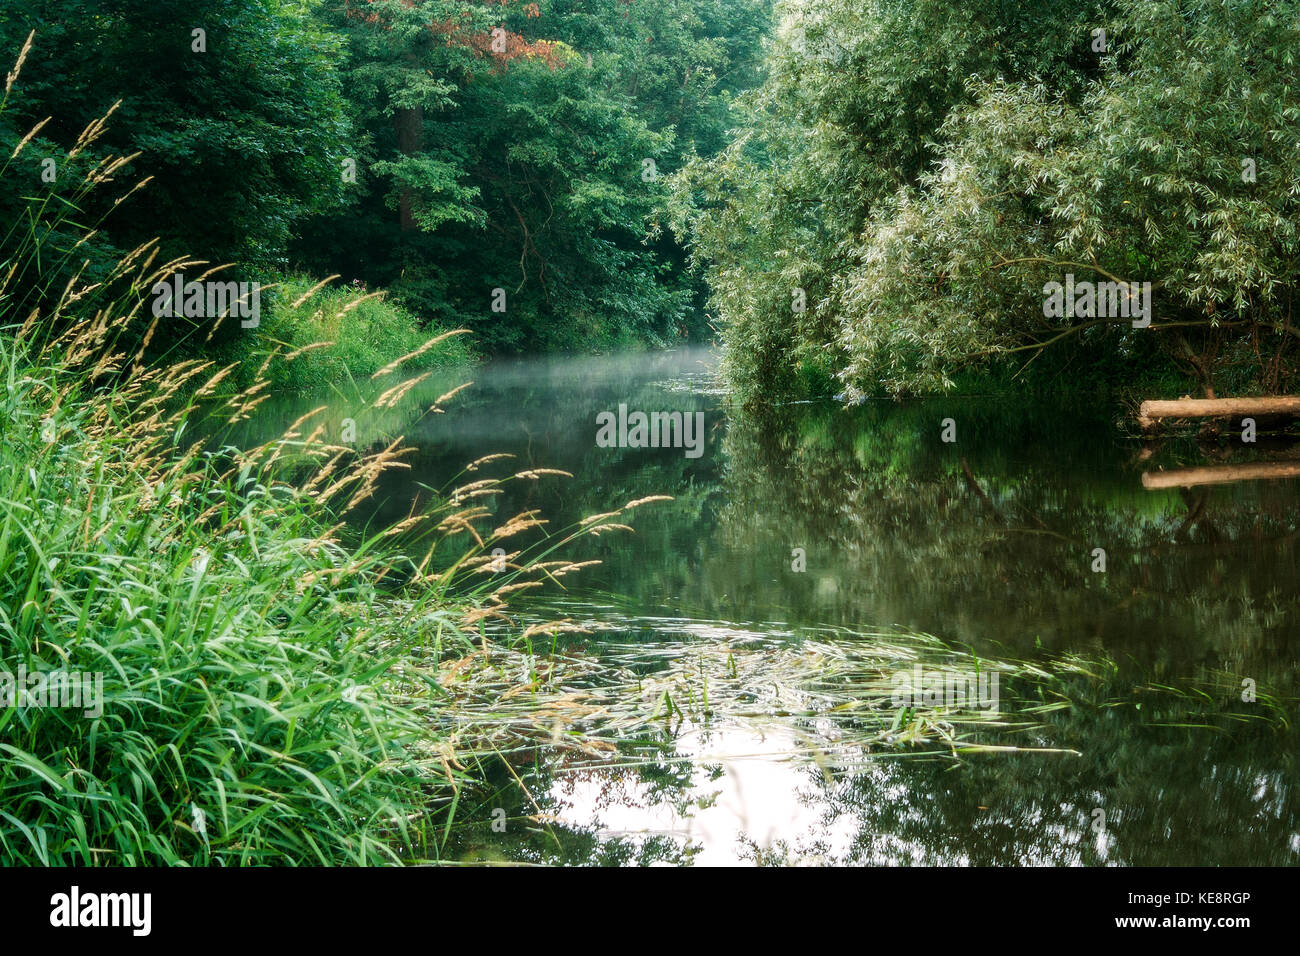 Summer foggy morning landscape with little river, reflections on the water surface and green trees and plants around. Stock Photo